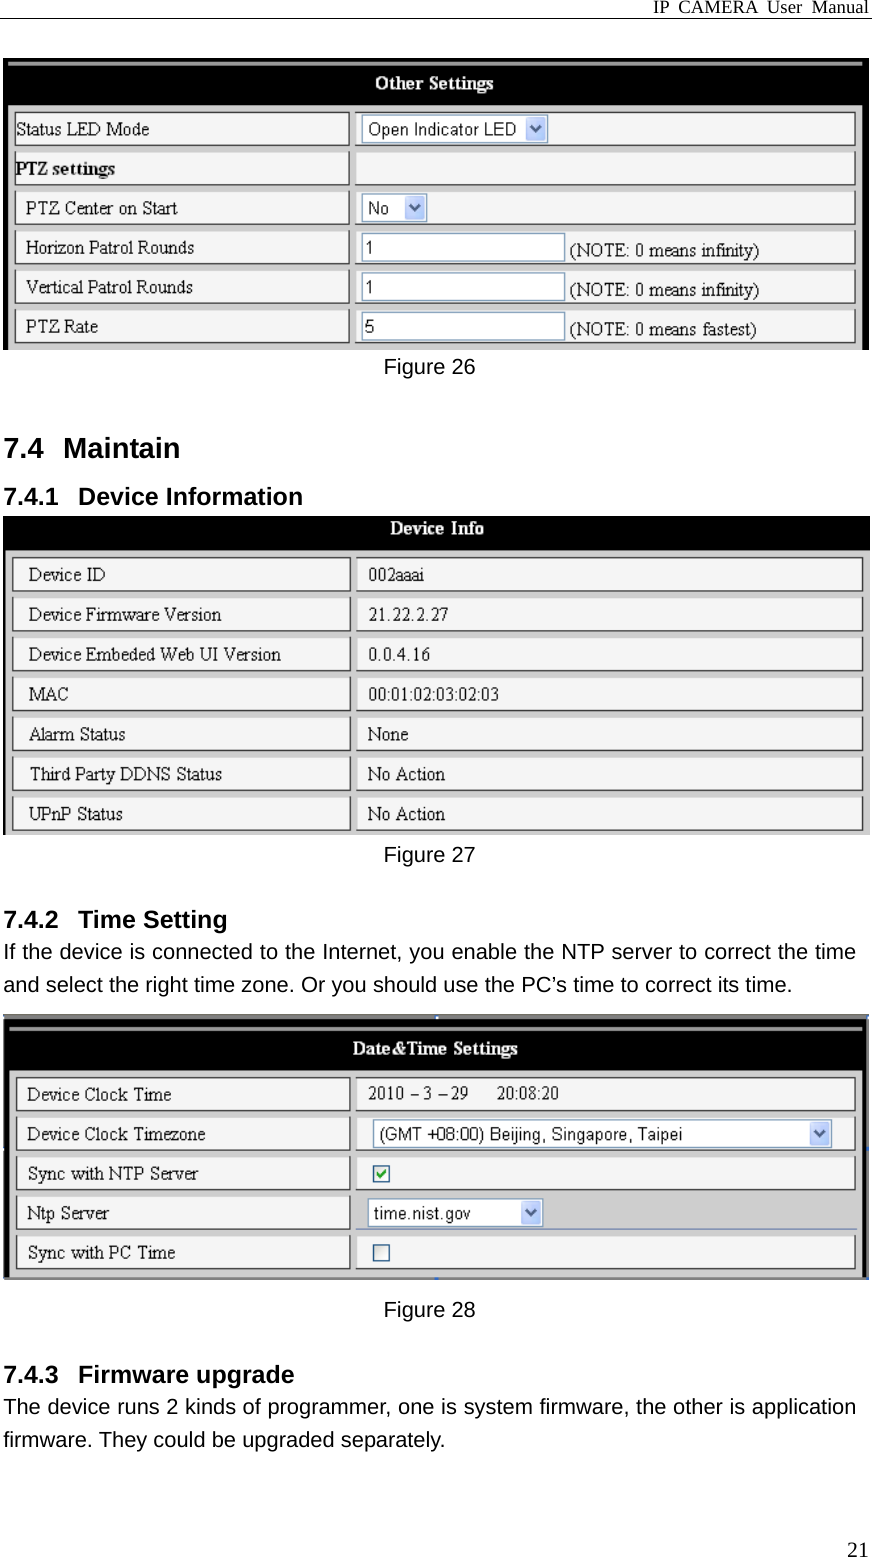 IP CAMERA User Manual  21 Figure 26  7.4 Maintain 7.4.1 Device Information  Figure 27  7.4.2 Time Setting If the device is connected to the Internet, you enable the NTP server to correct the time and select the right time zone. Or you should use the PC’s time to correct its time.  Figure 28  7.4.3 Firmware upgrade  The device runs 2 kinds of programmer, one is system firmware, the other is application firmware. They could be upgraded separately. 